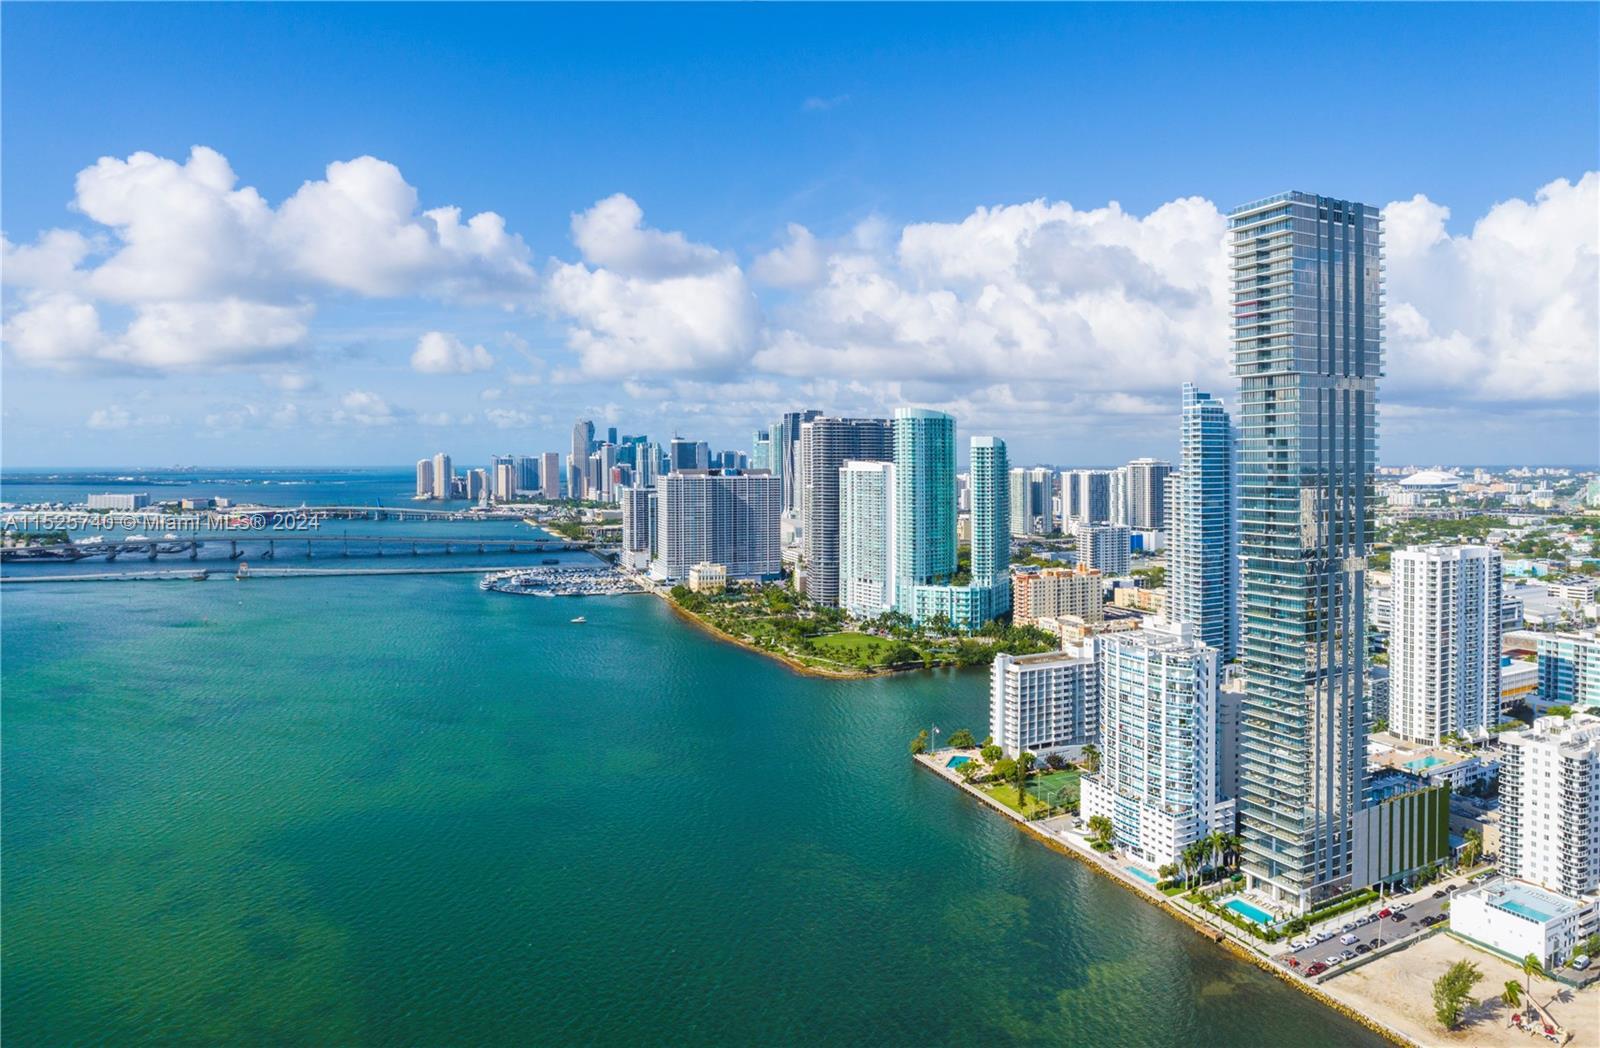 Rising alongside Biscayne Bay, Elysee is at the center of all that's new and exciting in Miami. Edge